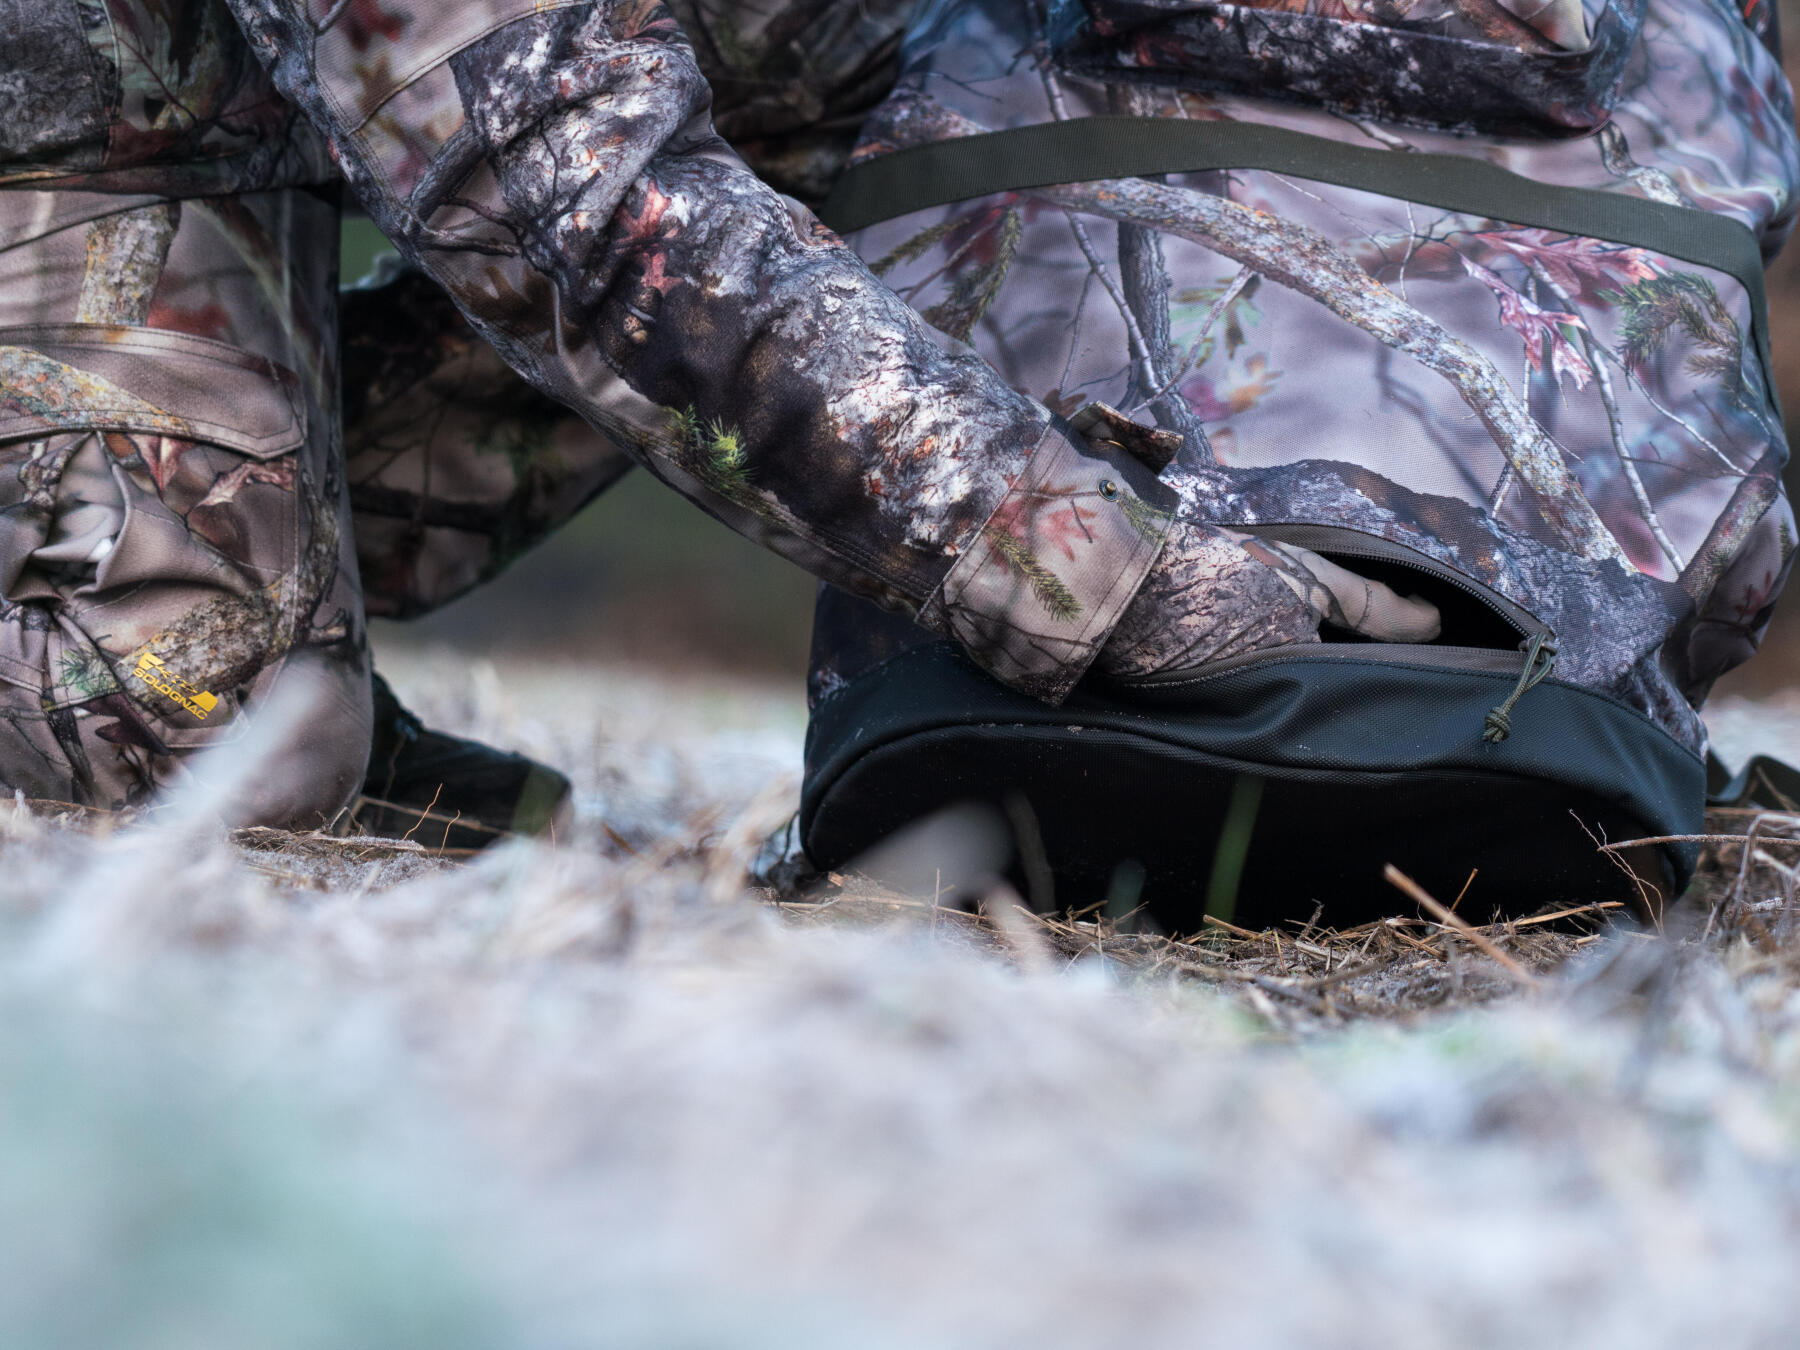 5 TIPS TO PREPARE FOR THE ARRIVAL OF GAME BIRDS